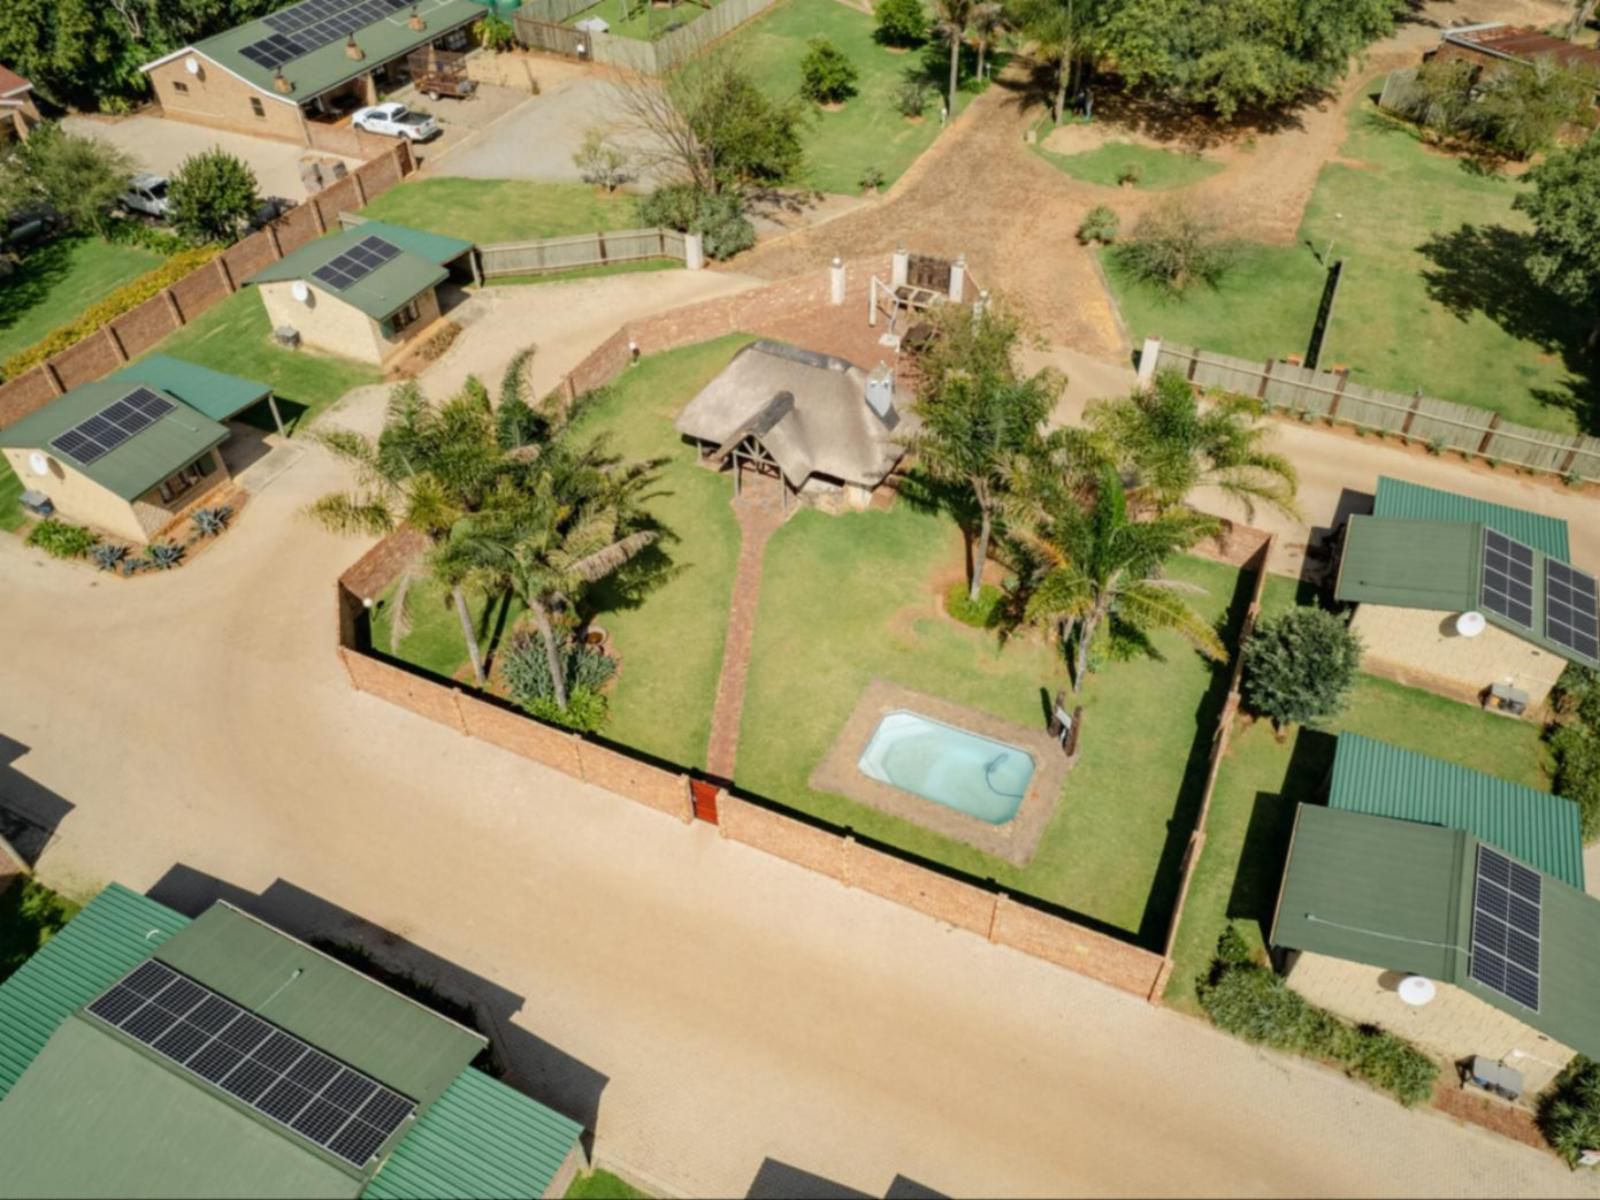 Sundowner Lodge And Caravan Park Piet Retief Mpumalanga South Africa House, Building, Architecture, Palm Tree, Plant, Nature, Wood, Aerial Photography, Swimming Pool